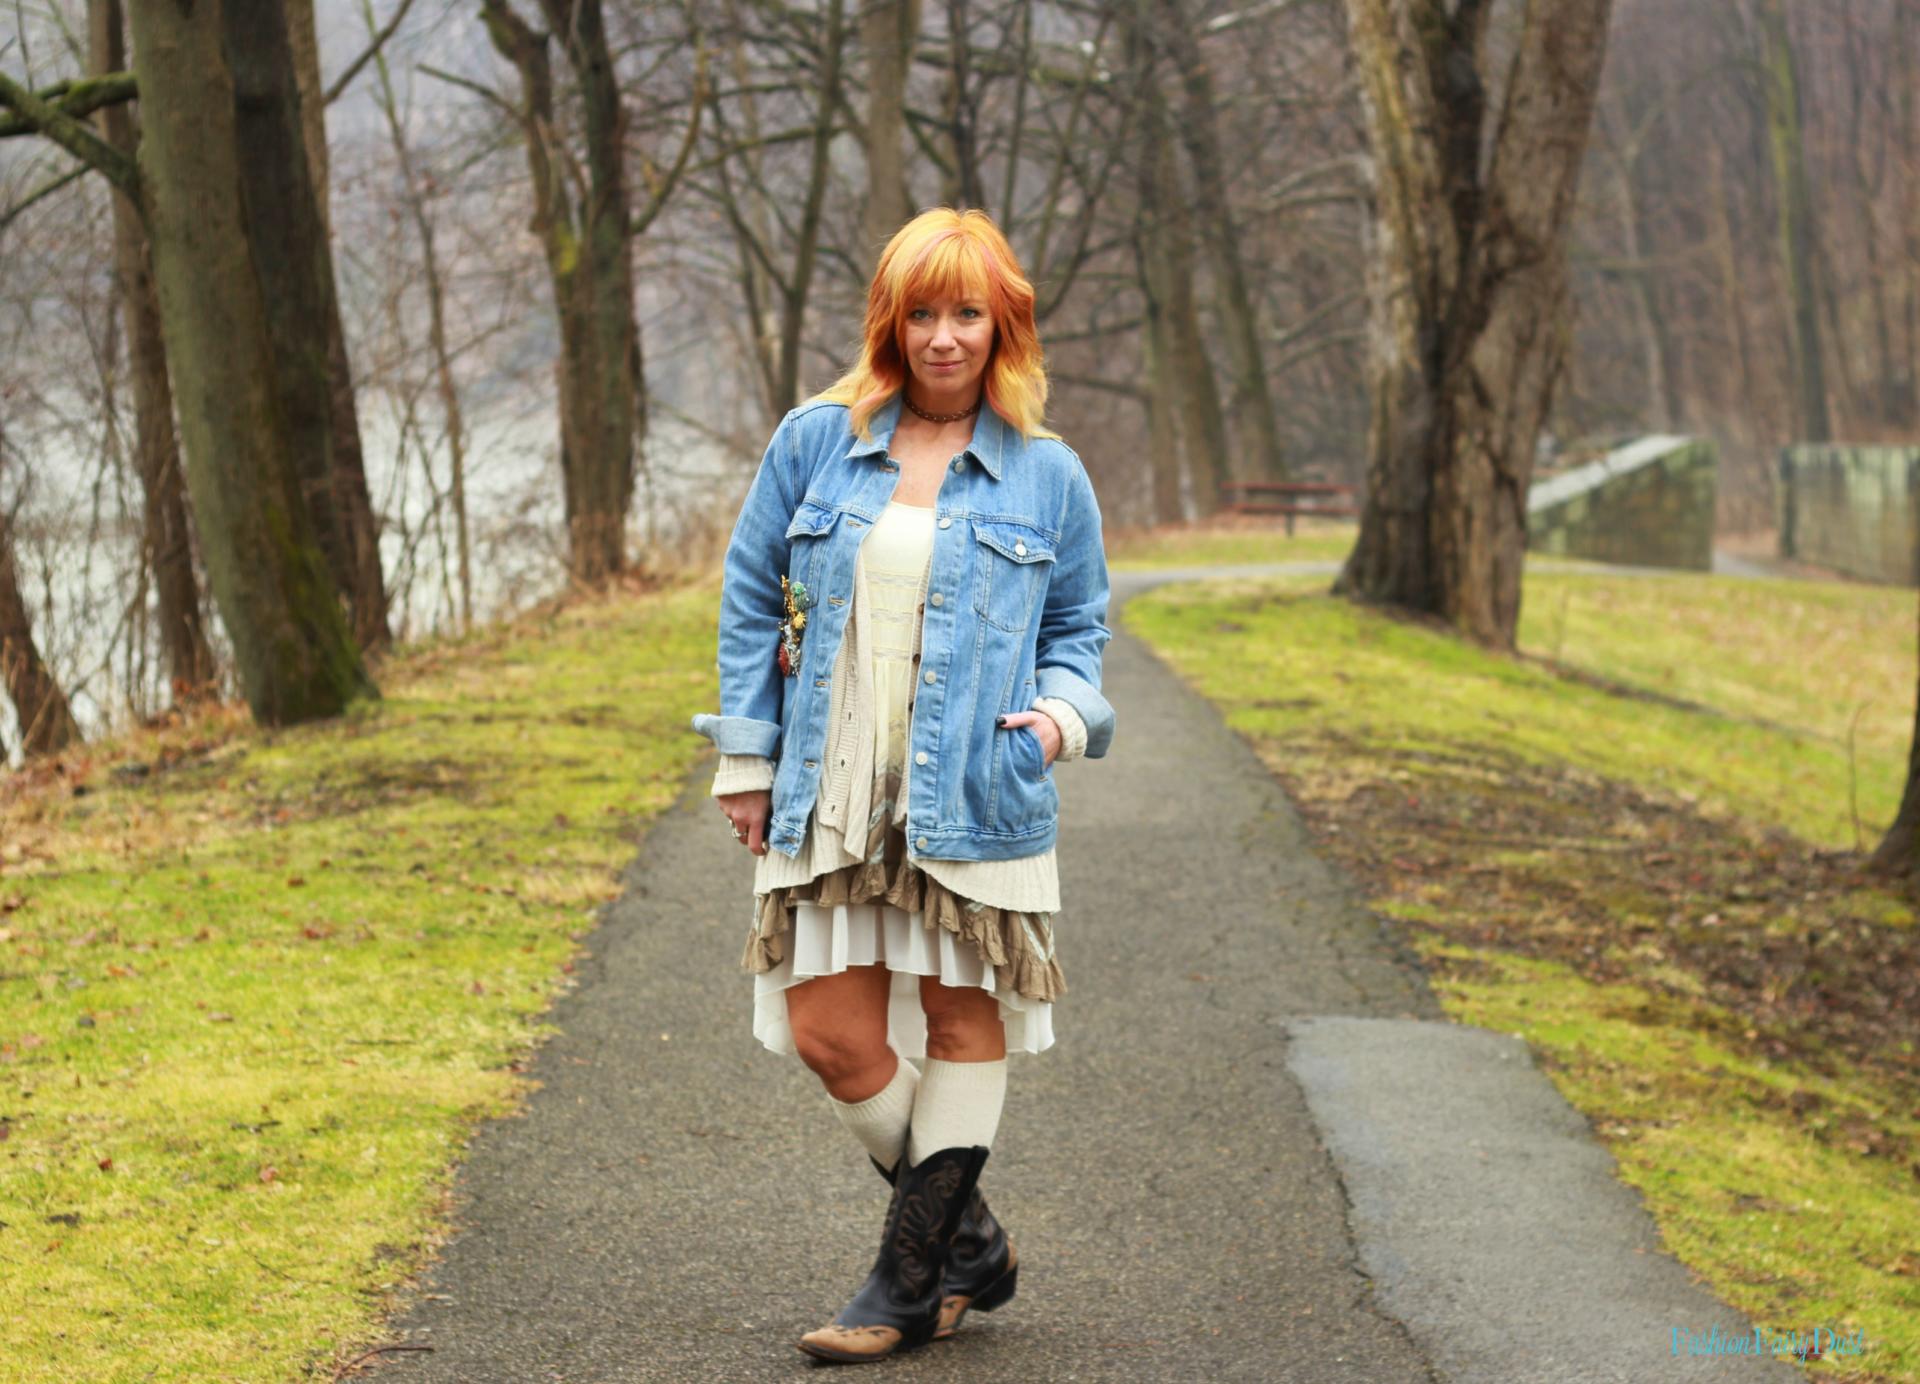 Cowboy boots, boho dress and denim jacket. How to style a Spring boho outfit.